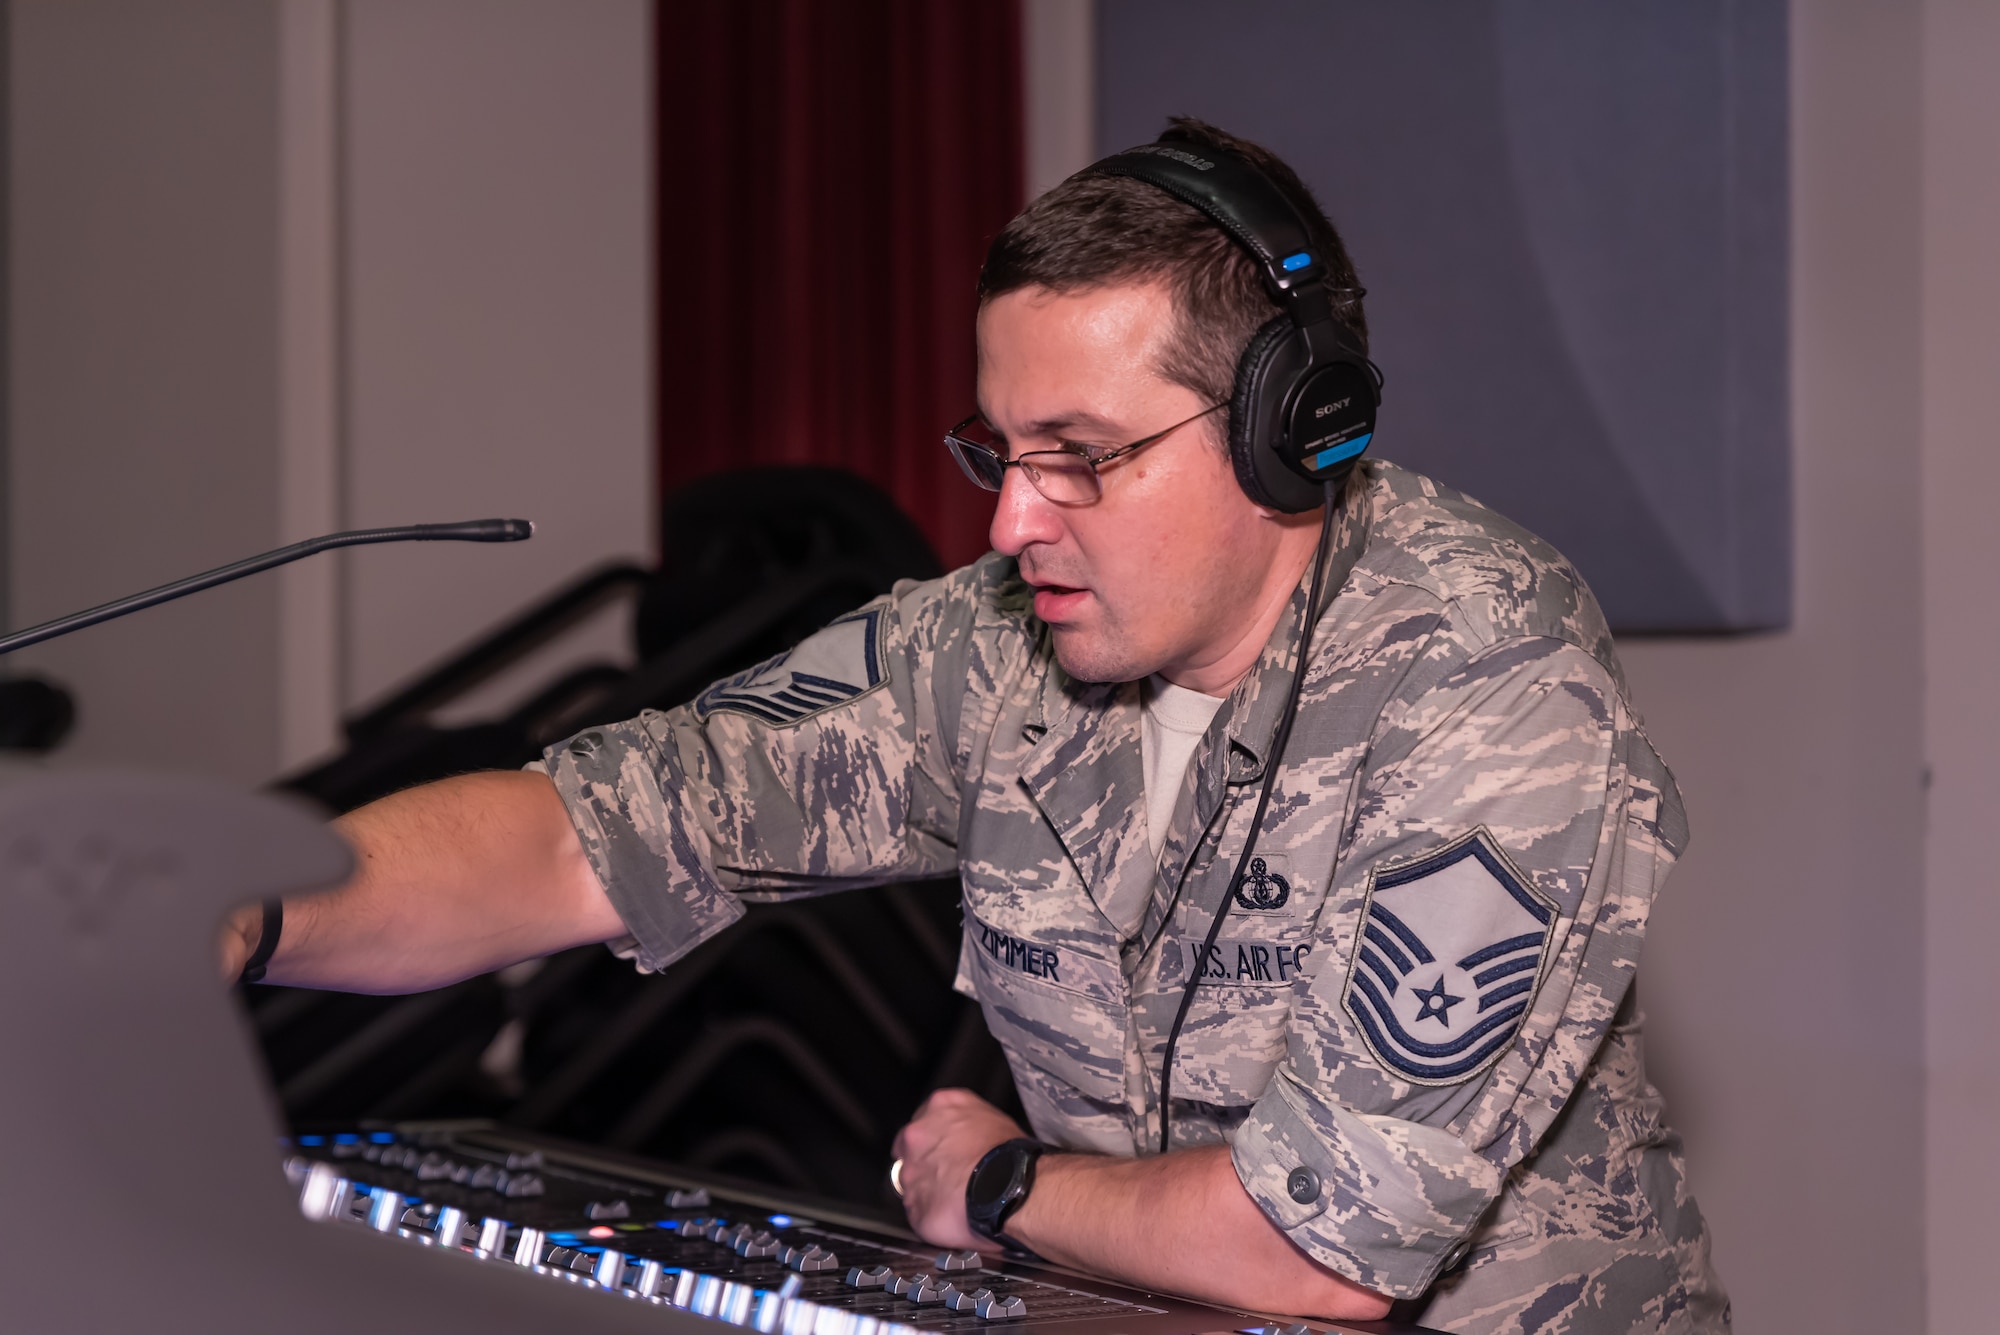 Audio Engineer Master Sgt. Loren Zimmer monitors audio levels during a recent rehearsal for the 2018 Fall tour